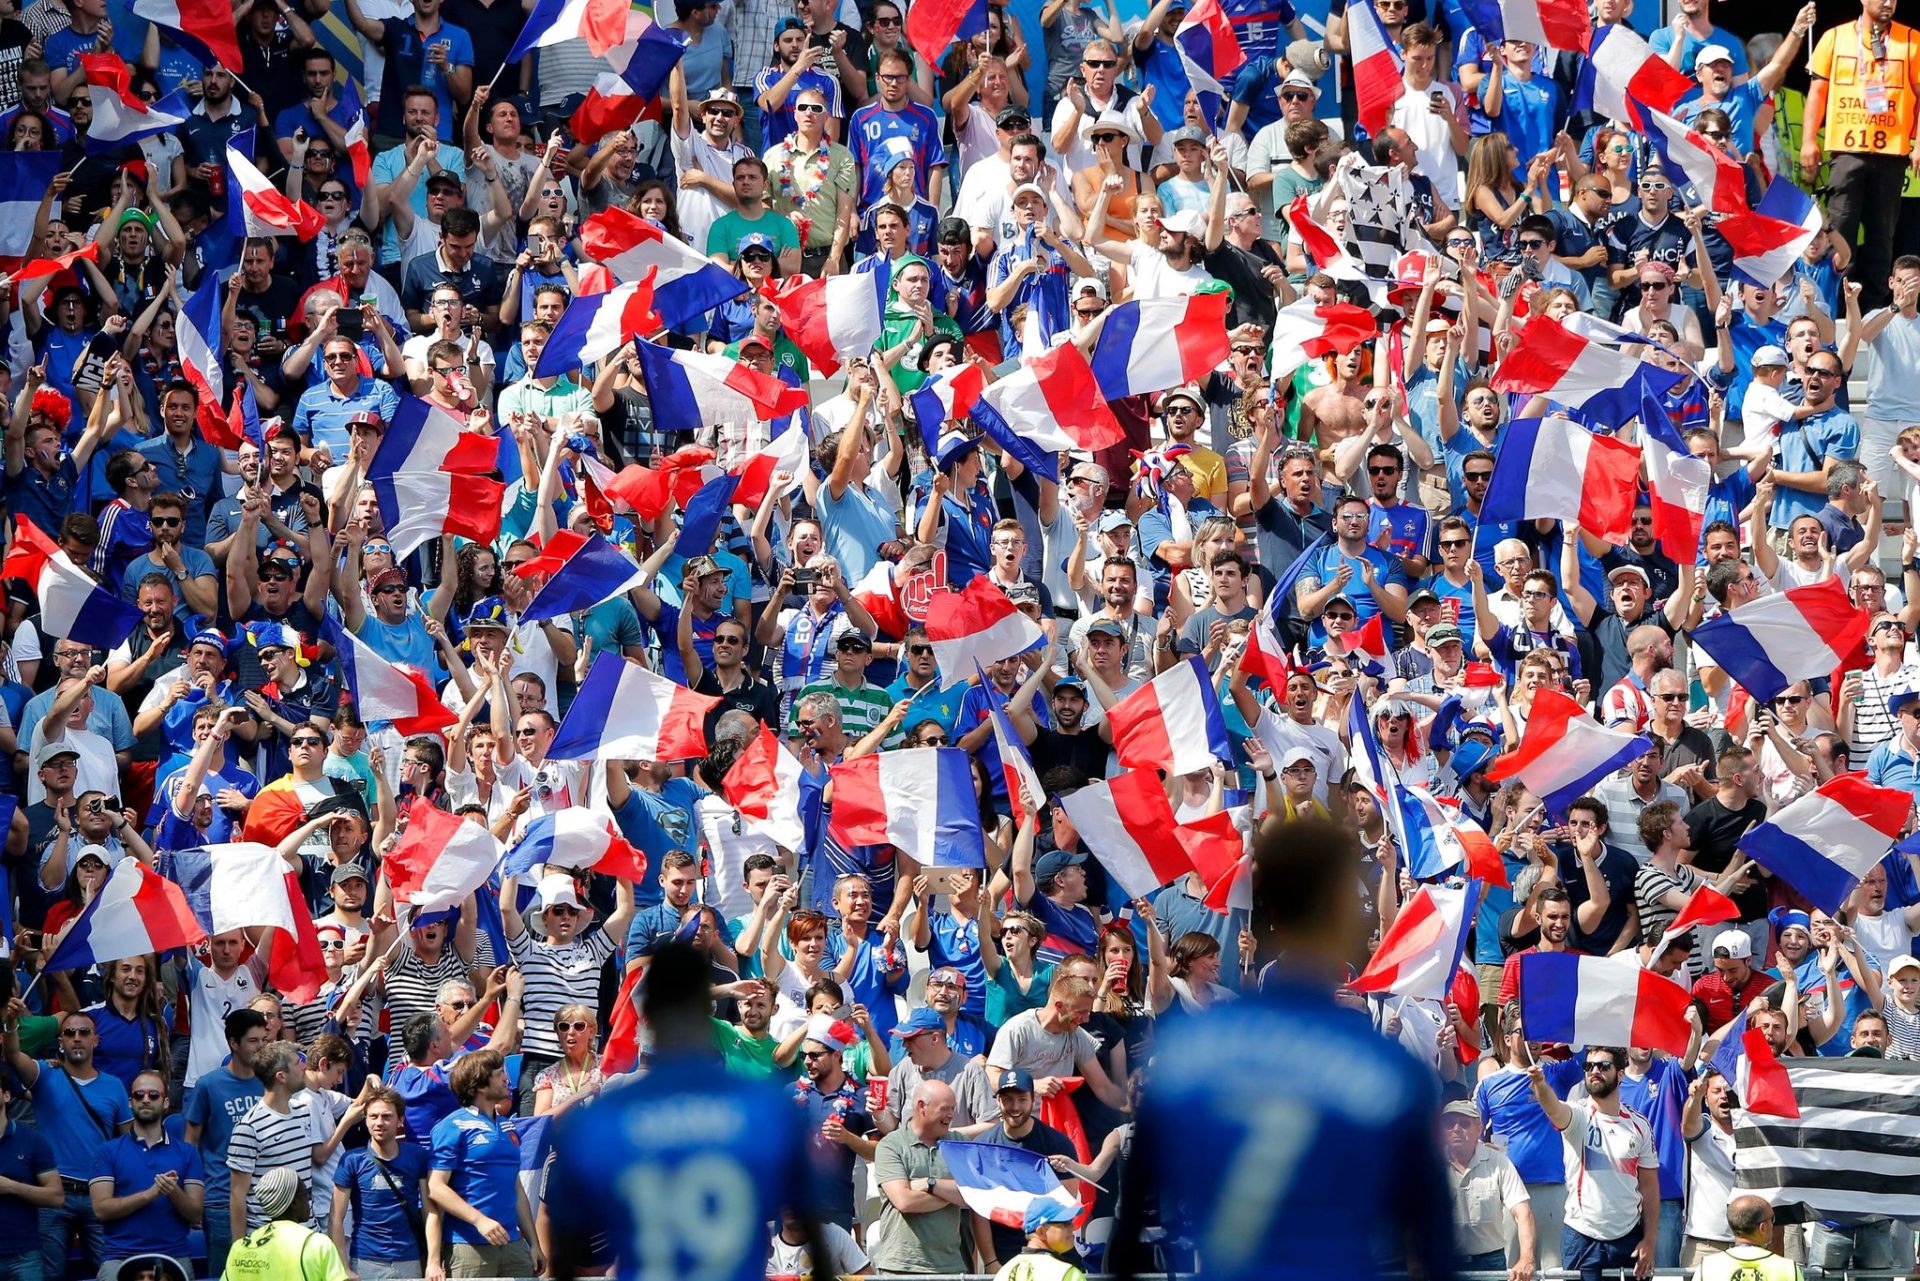 France to allow upto 5000 fans when football resumes